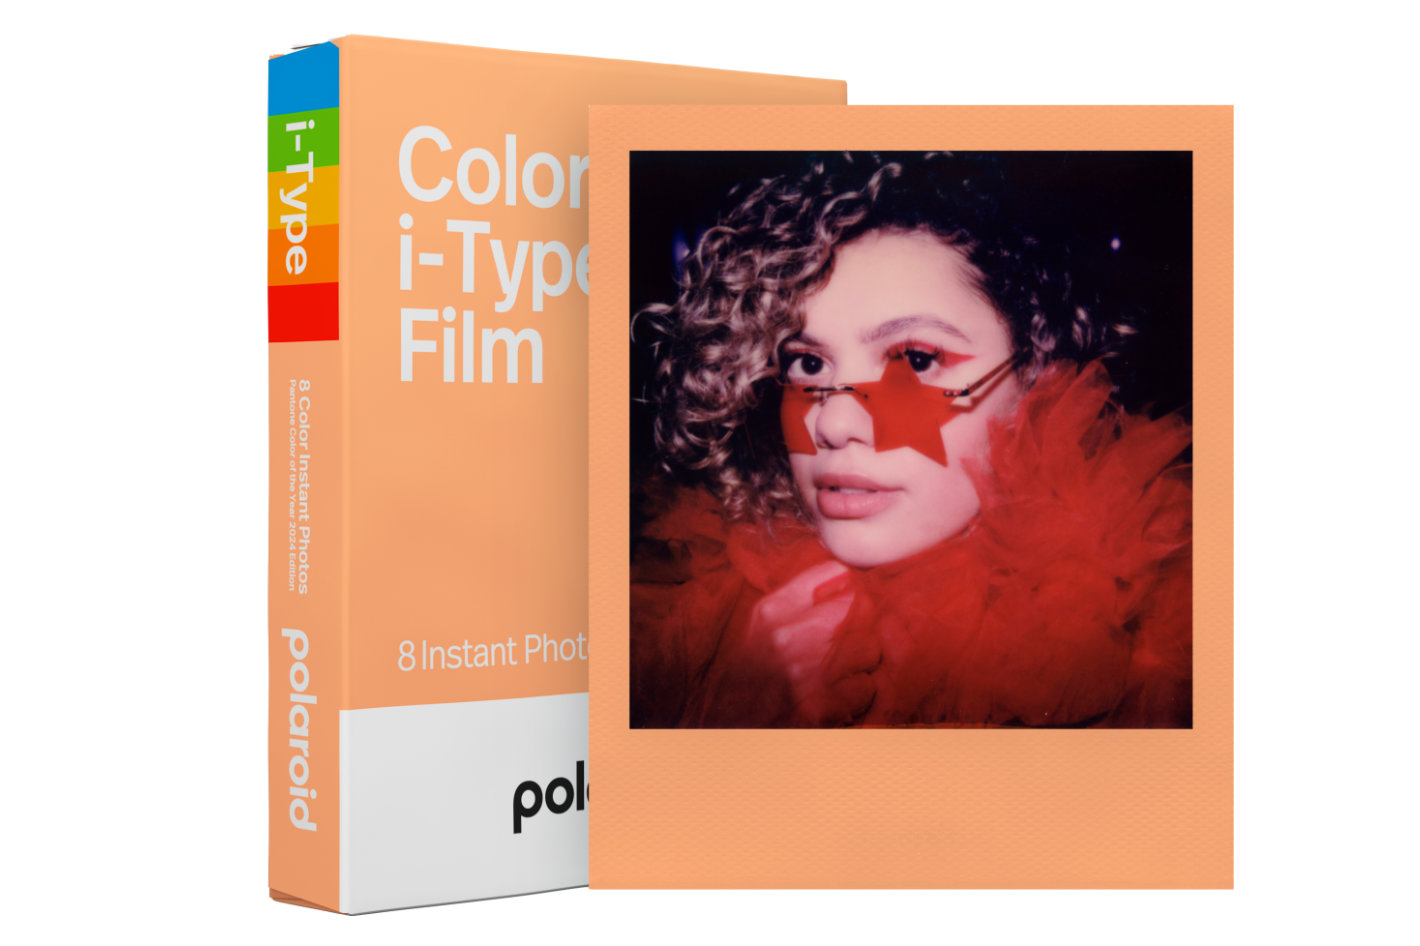 Polaroid teams with Pantone for a new color film